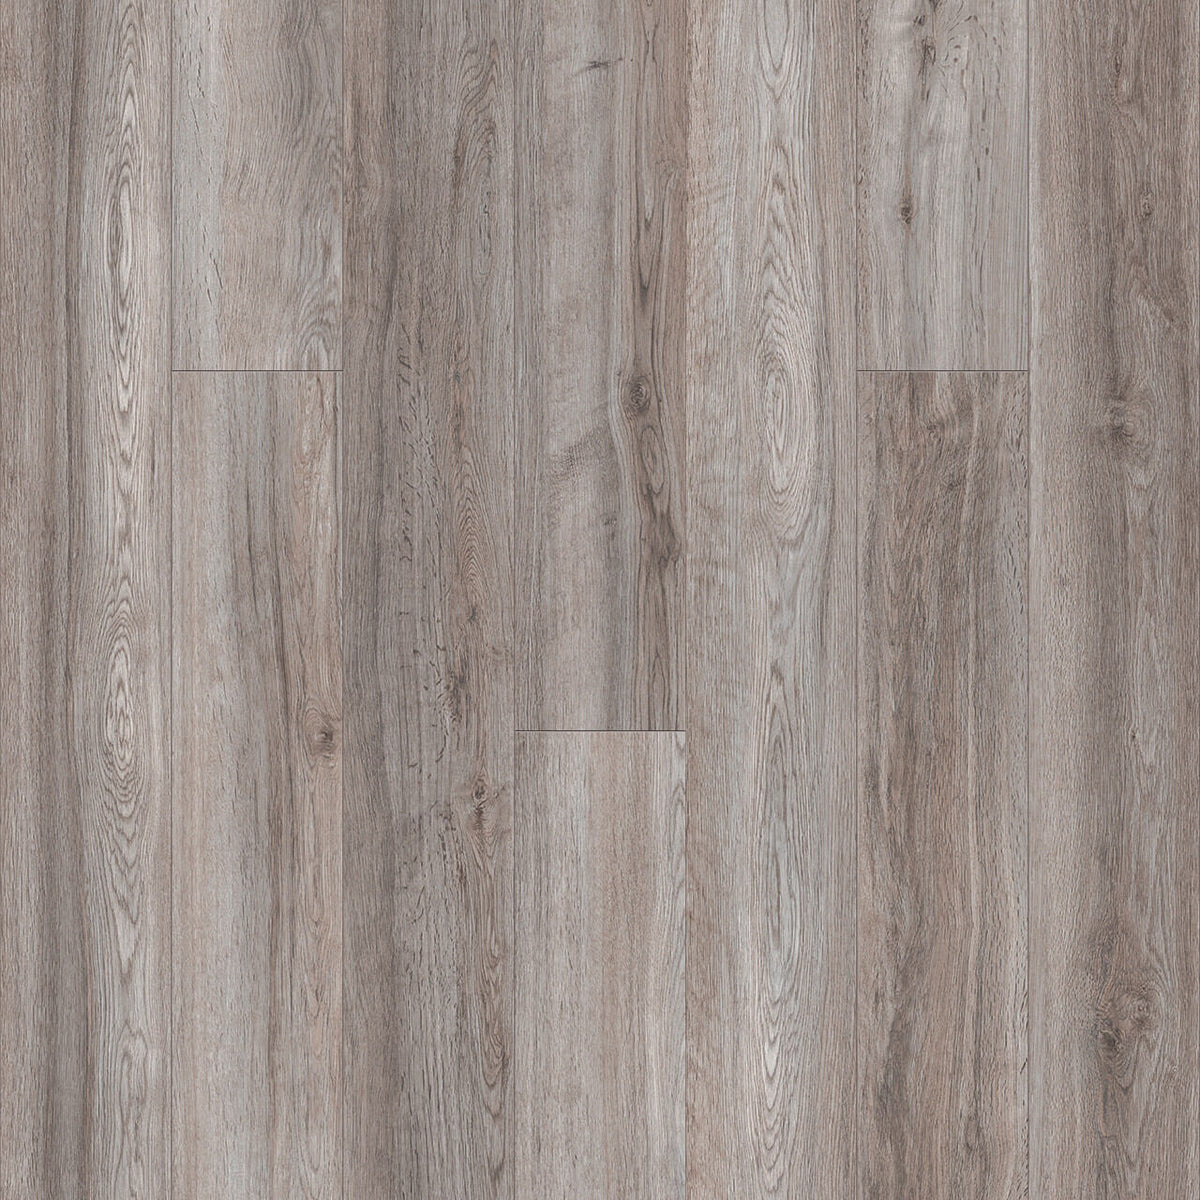 Engineered Floors - Wood Lux Collection - 8 in. x 54 in. - Milford Sound